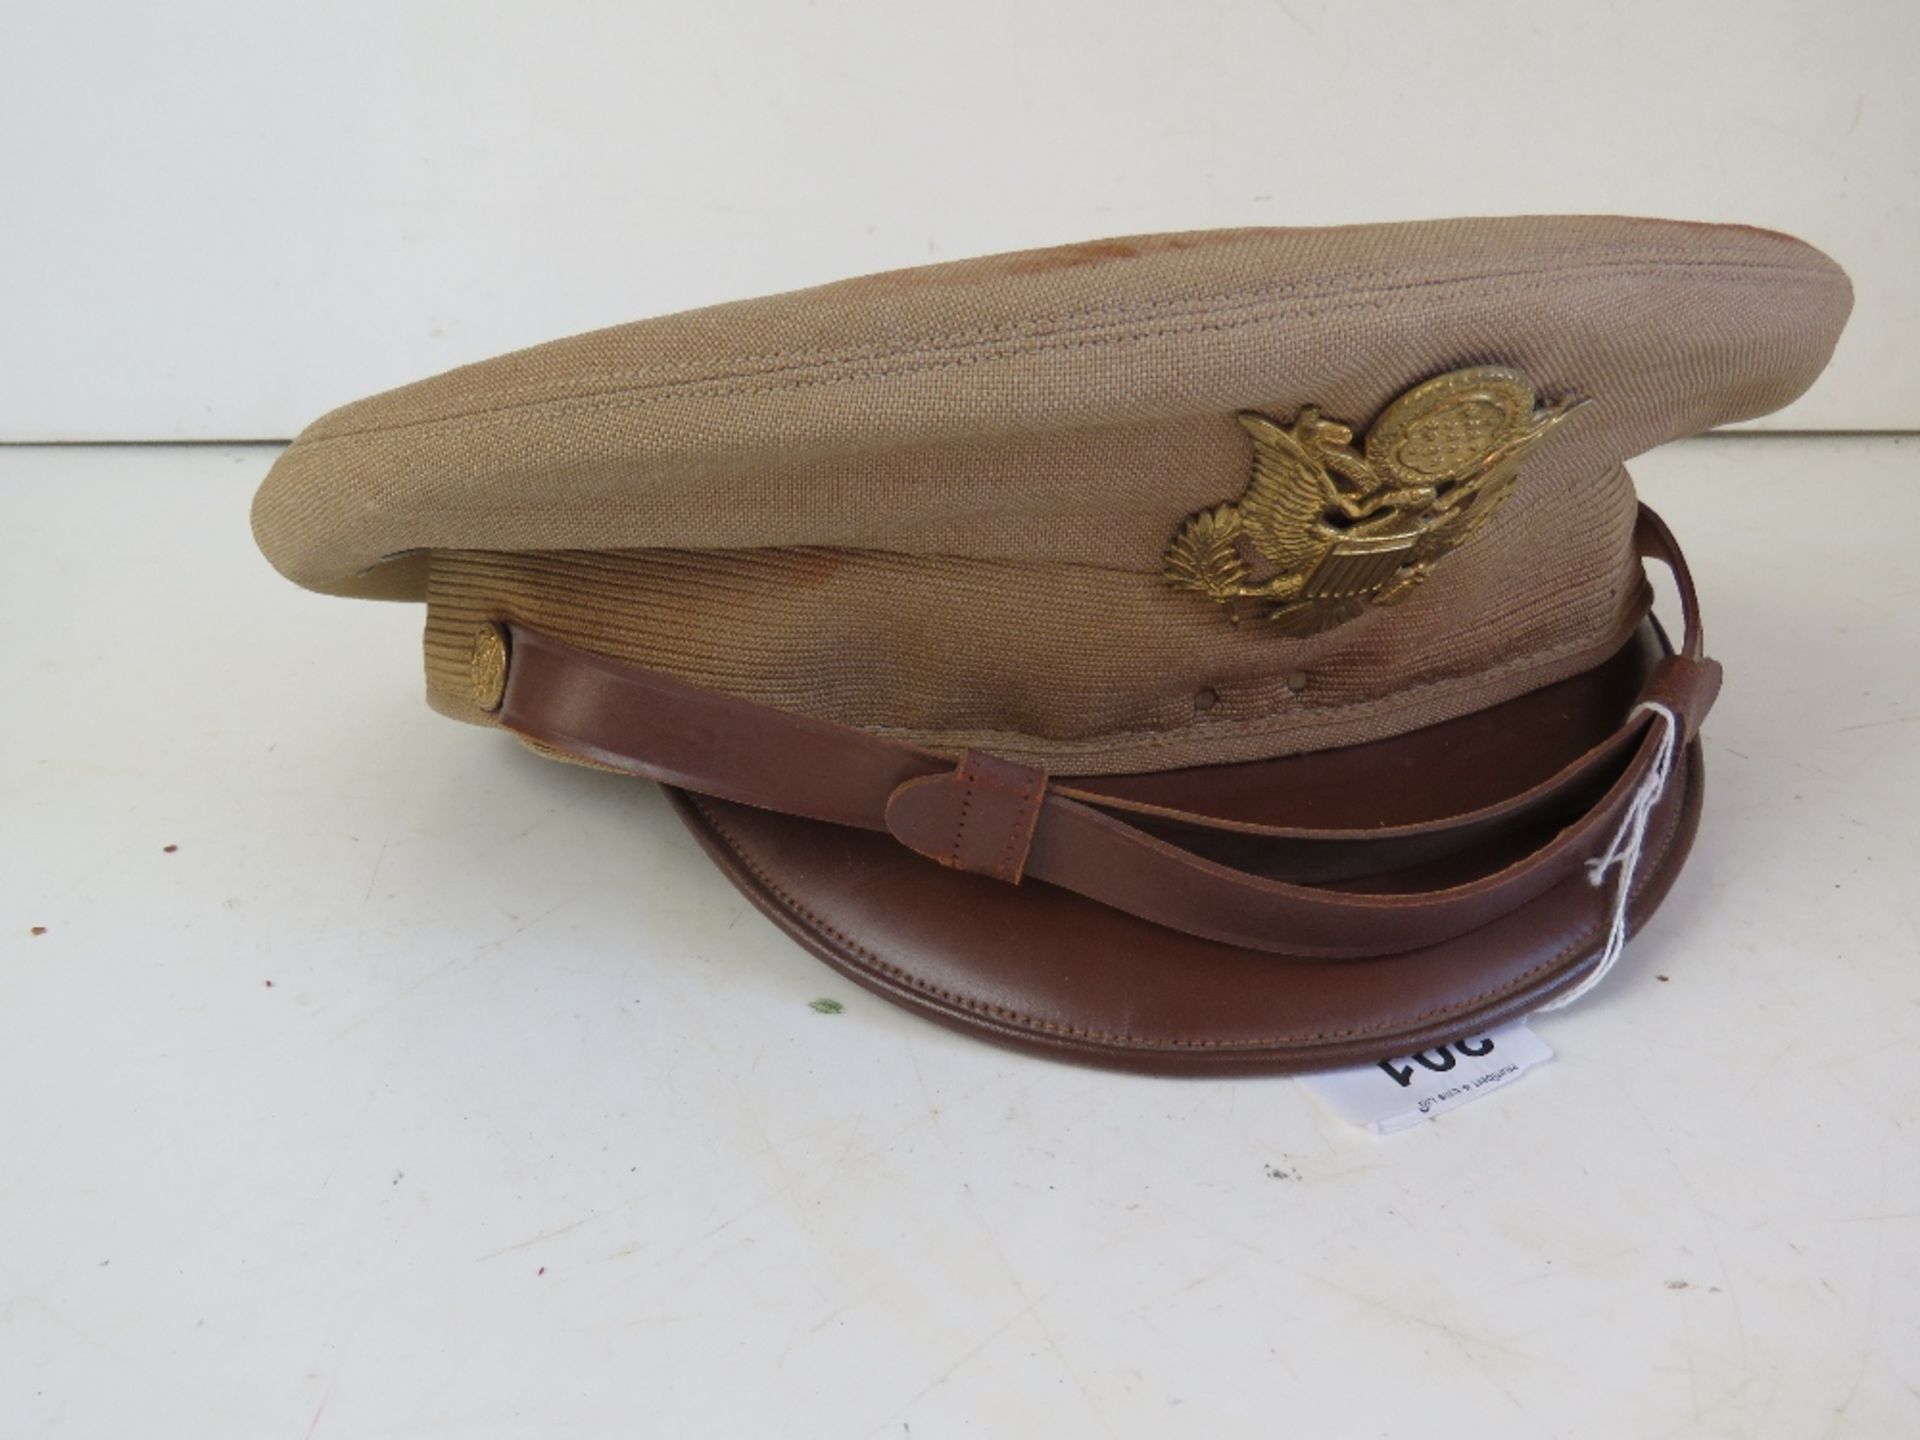 A WWII US Army cap, size 7 ¼.